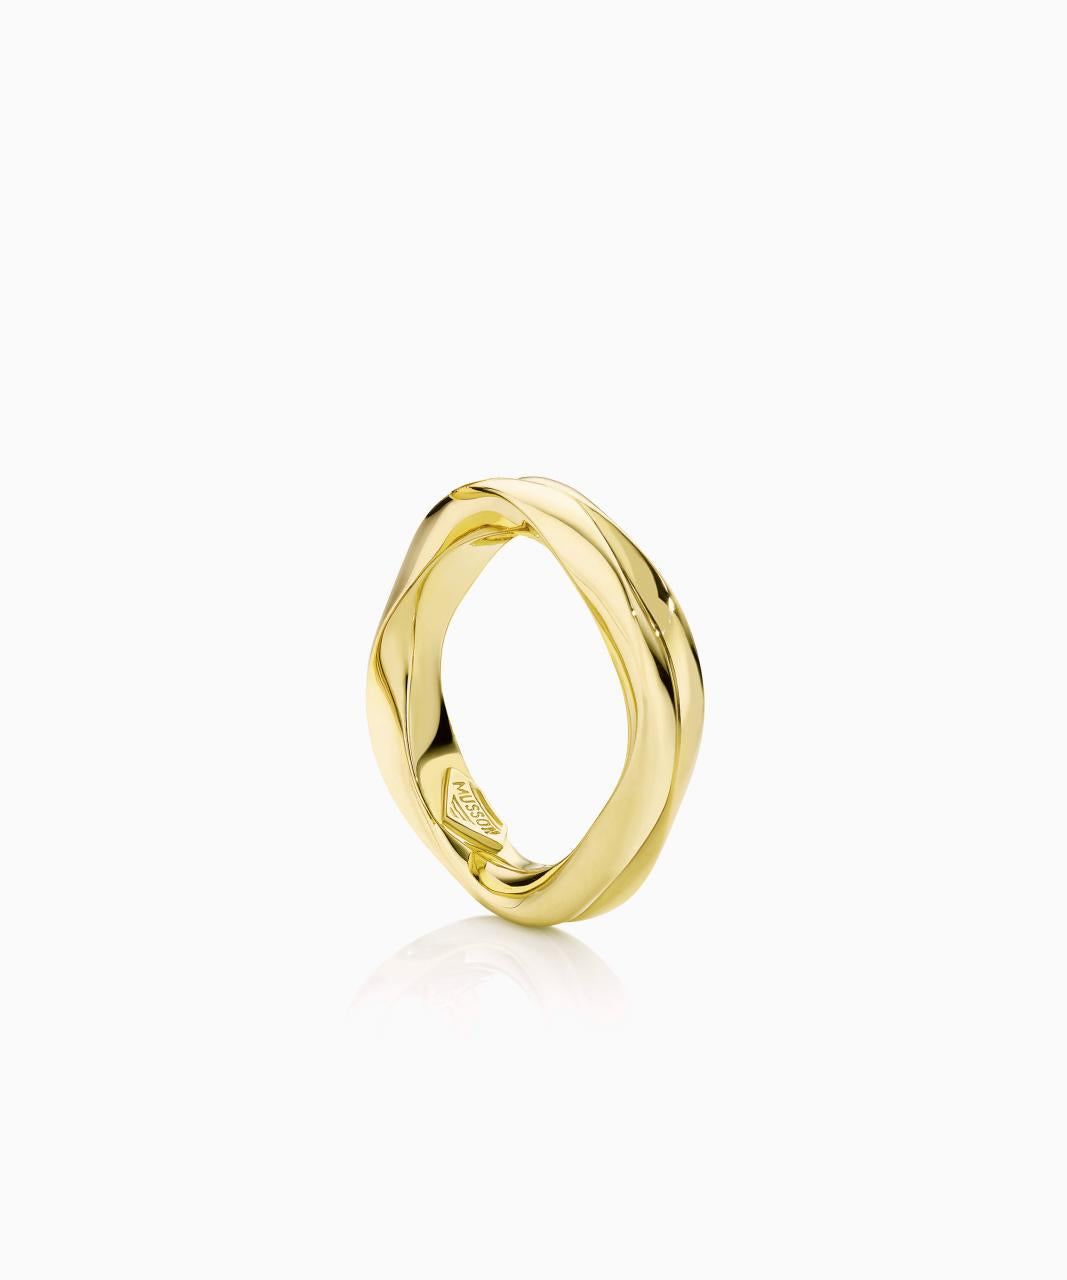 Entwined Wedding Ring - 4mm